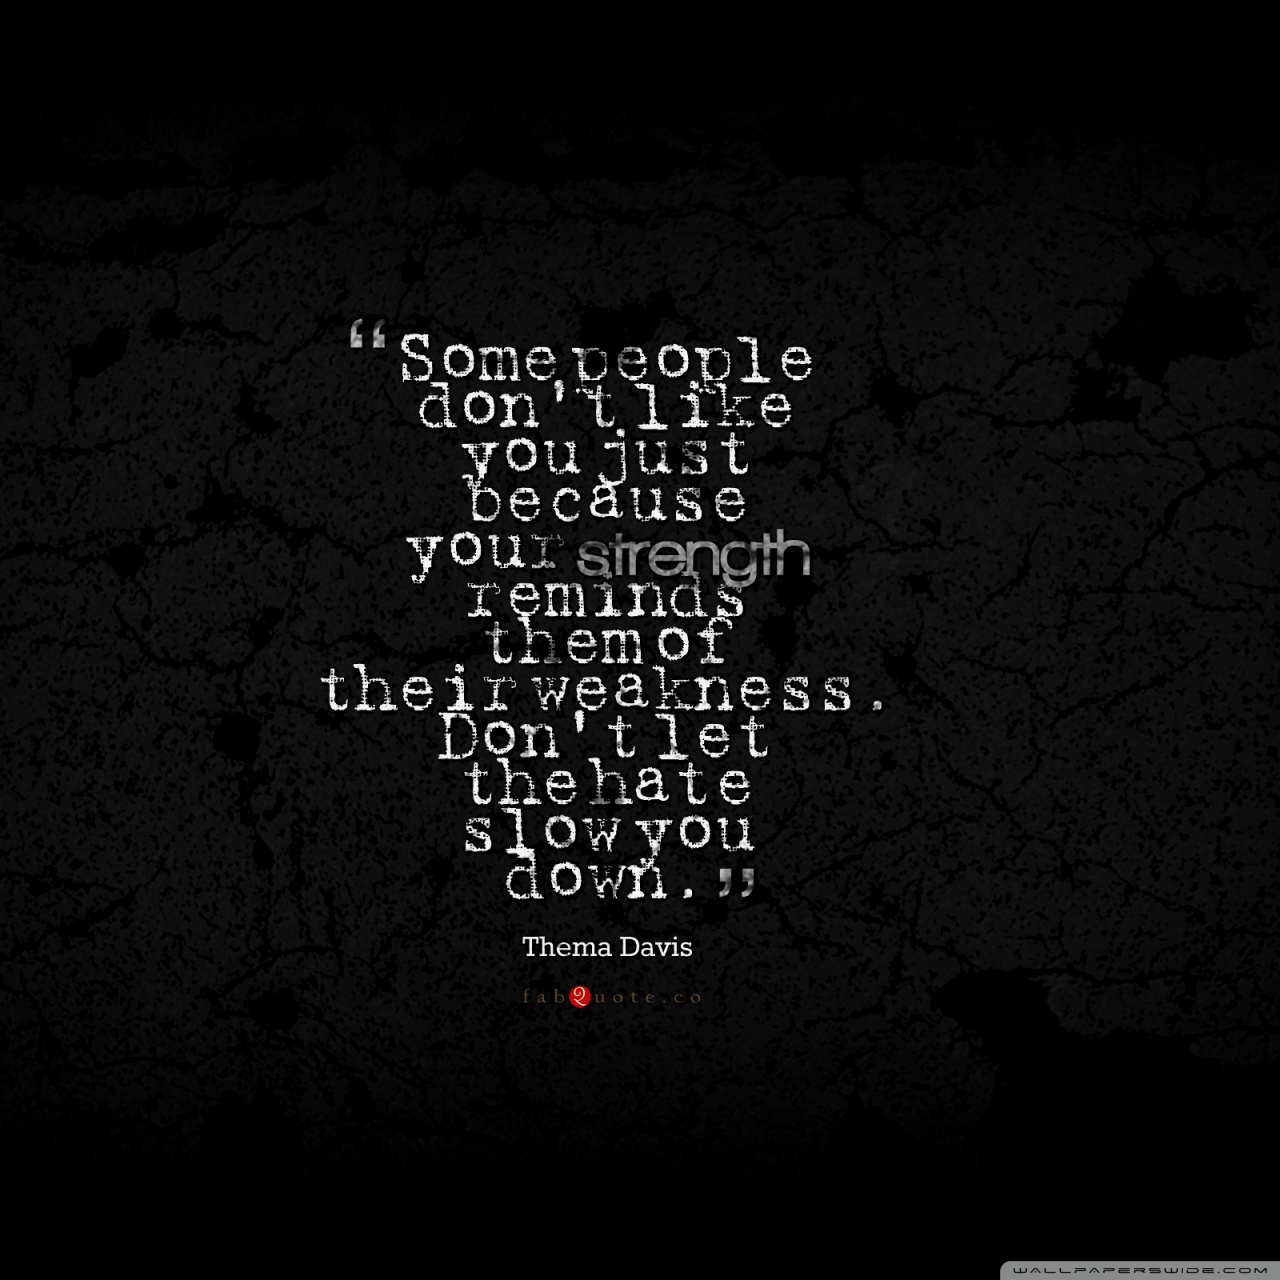 Thema Davis Quote about Strength, Weakness, Hate Ultra HD Desktop Background Wallpaper for 4K UHD TV, Multi Display, Dual Monitor, Tablet